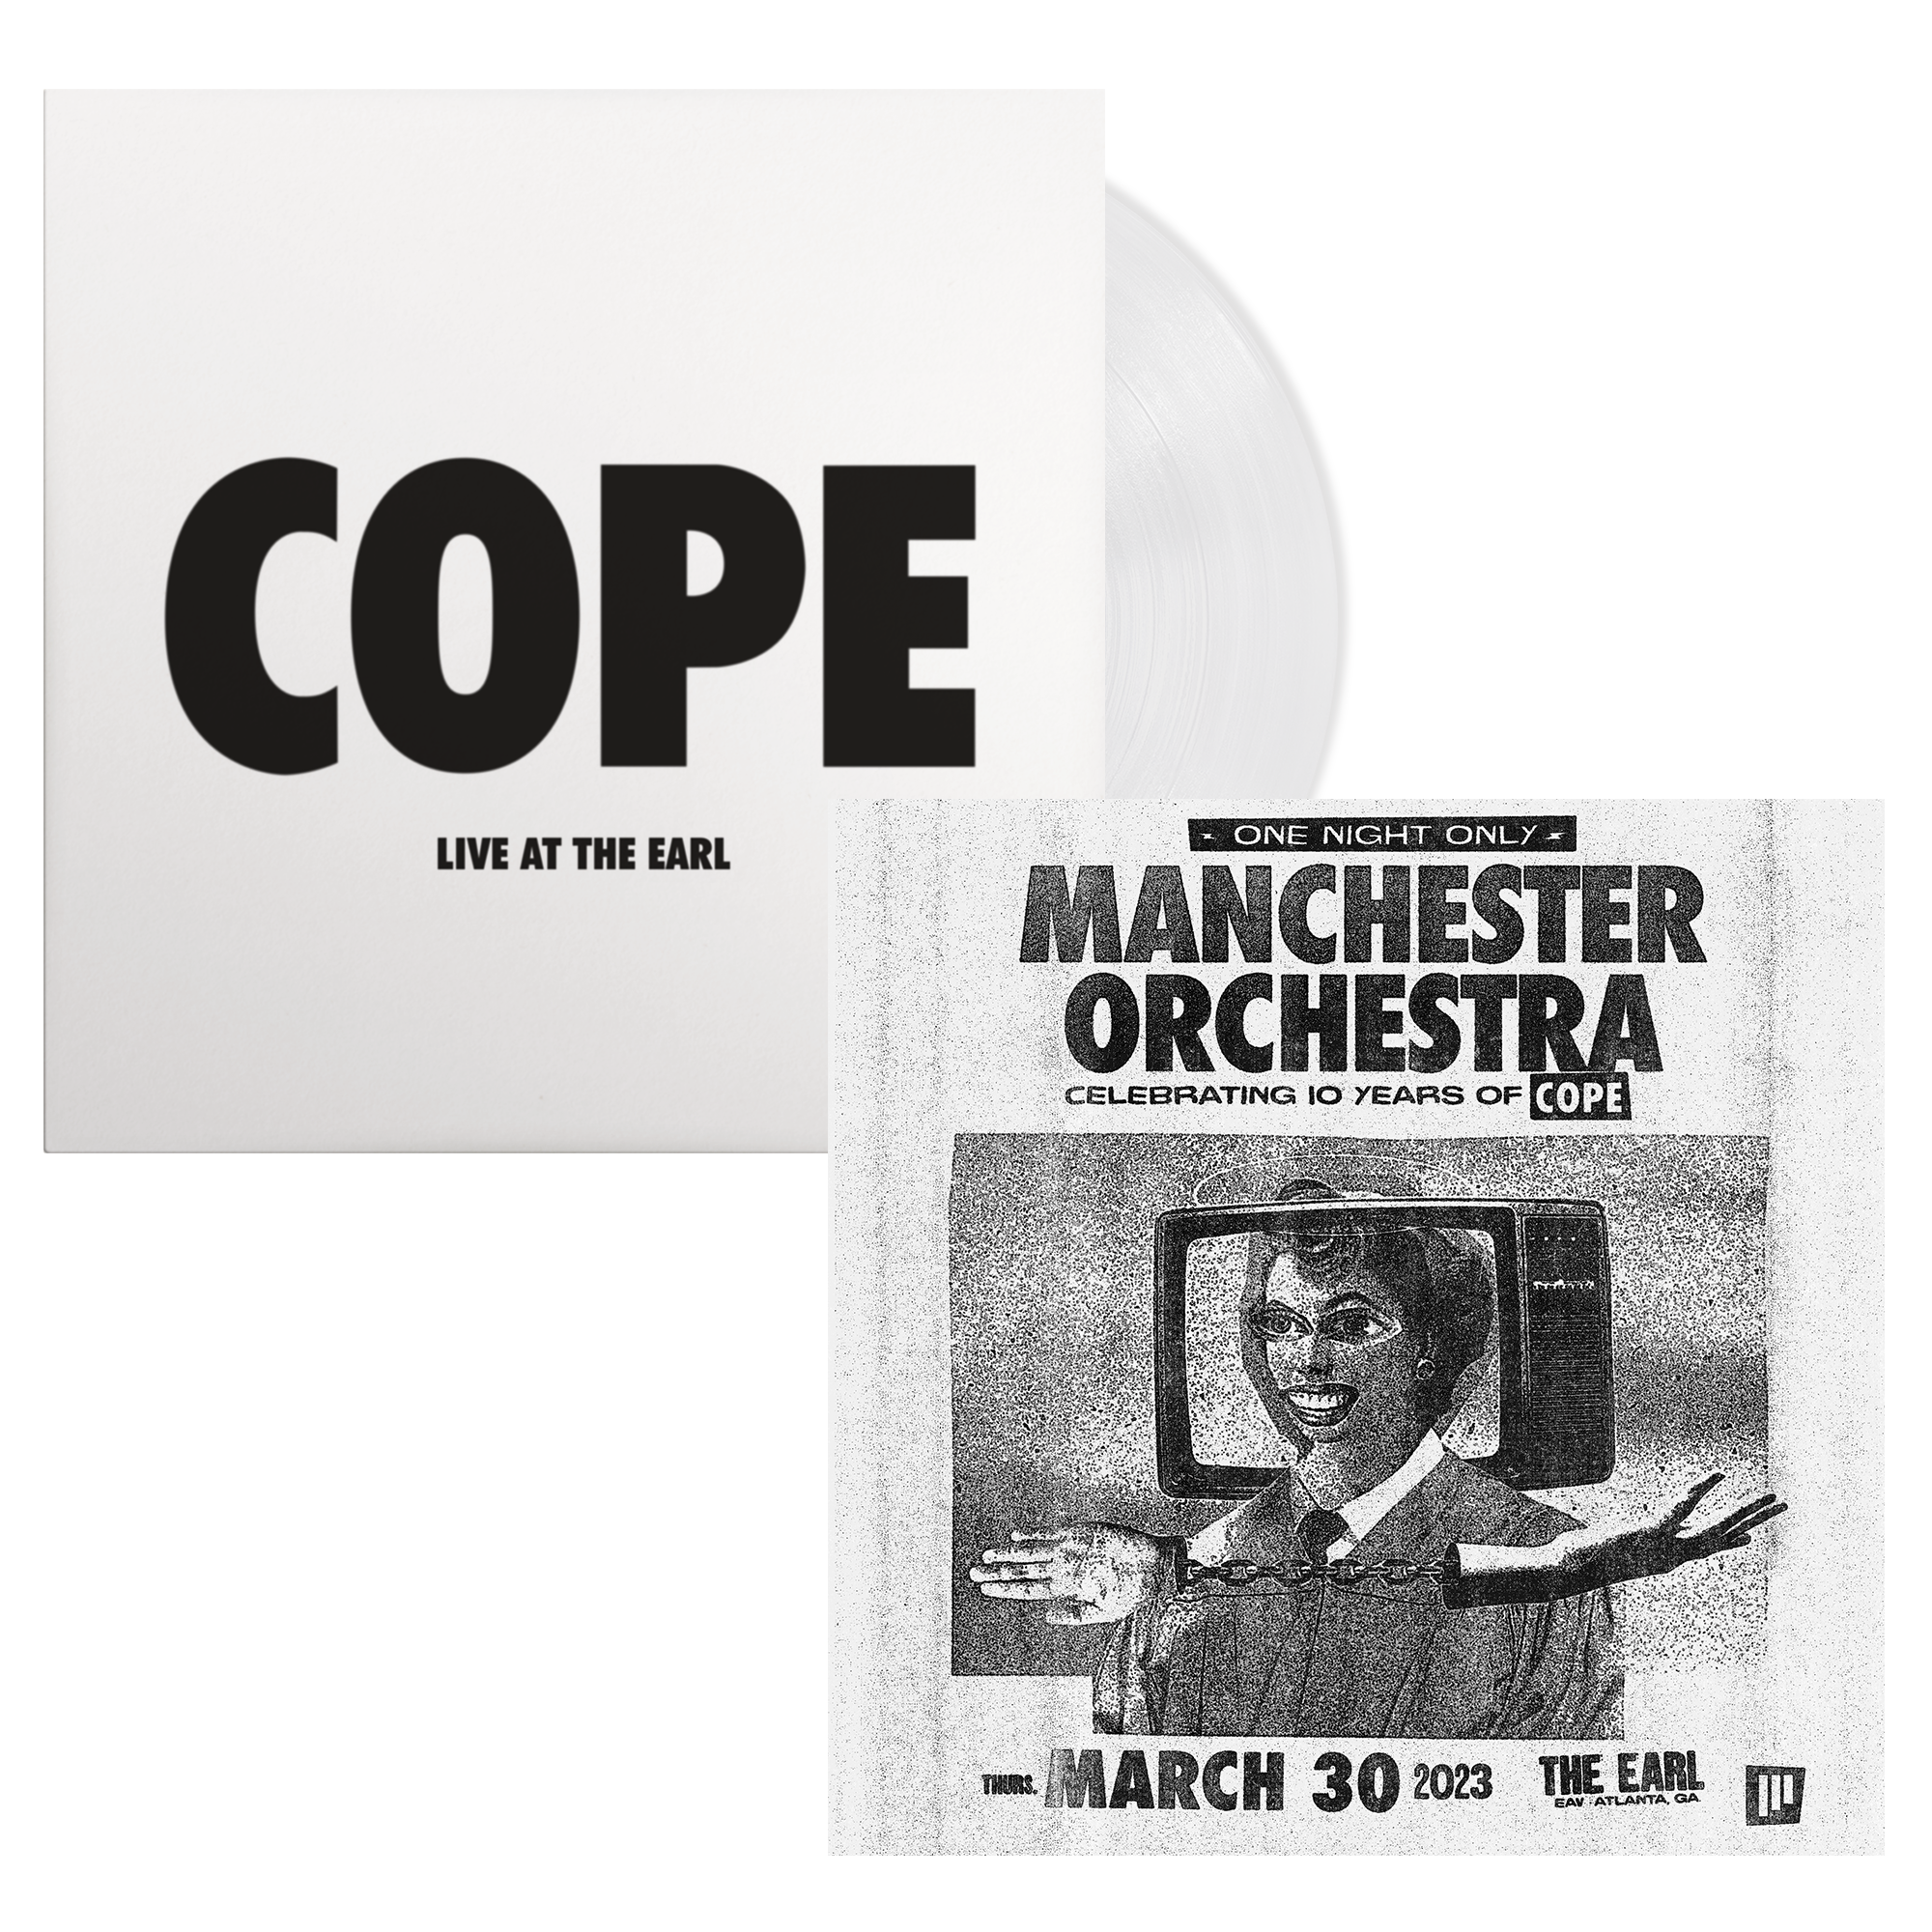 COPE - Live at The Earl: Limited Clear Vinyl LP & Exclusive Print